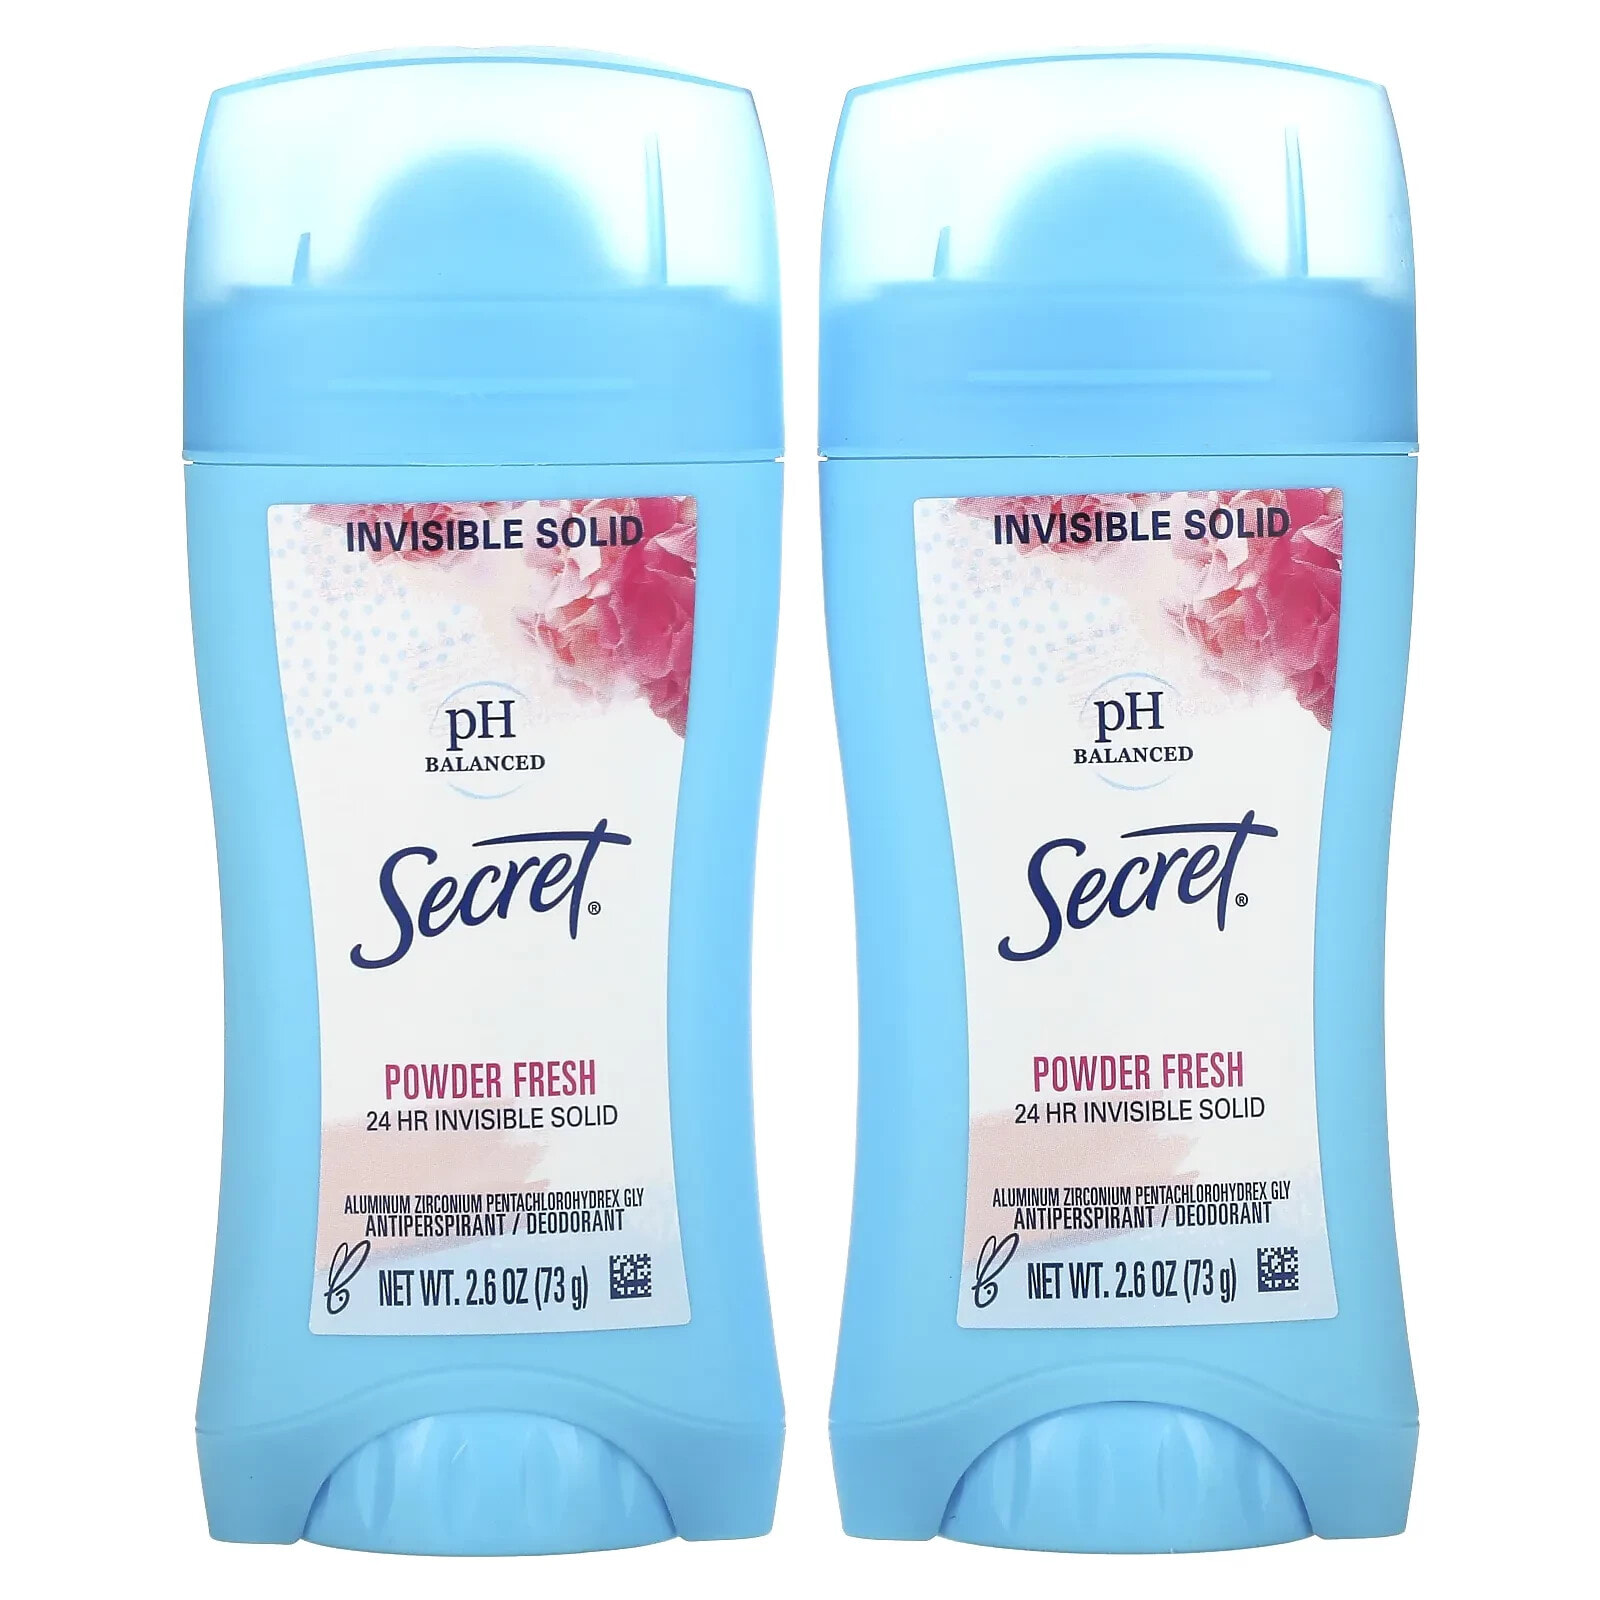 pH Balanced Antiperspirant/Deodorant, Invisible Solid, Shower Fresh, Twin Pack, 2.6 oz (73 g) Each